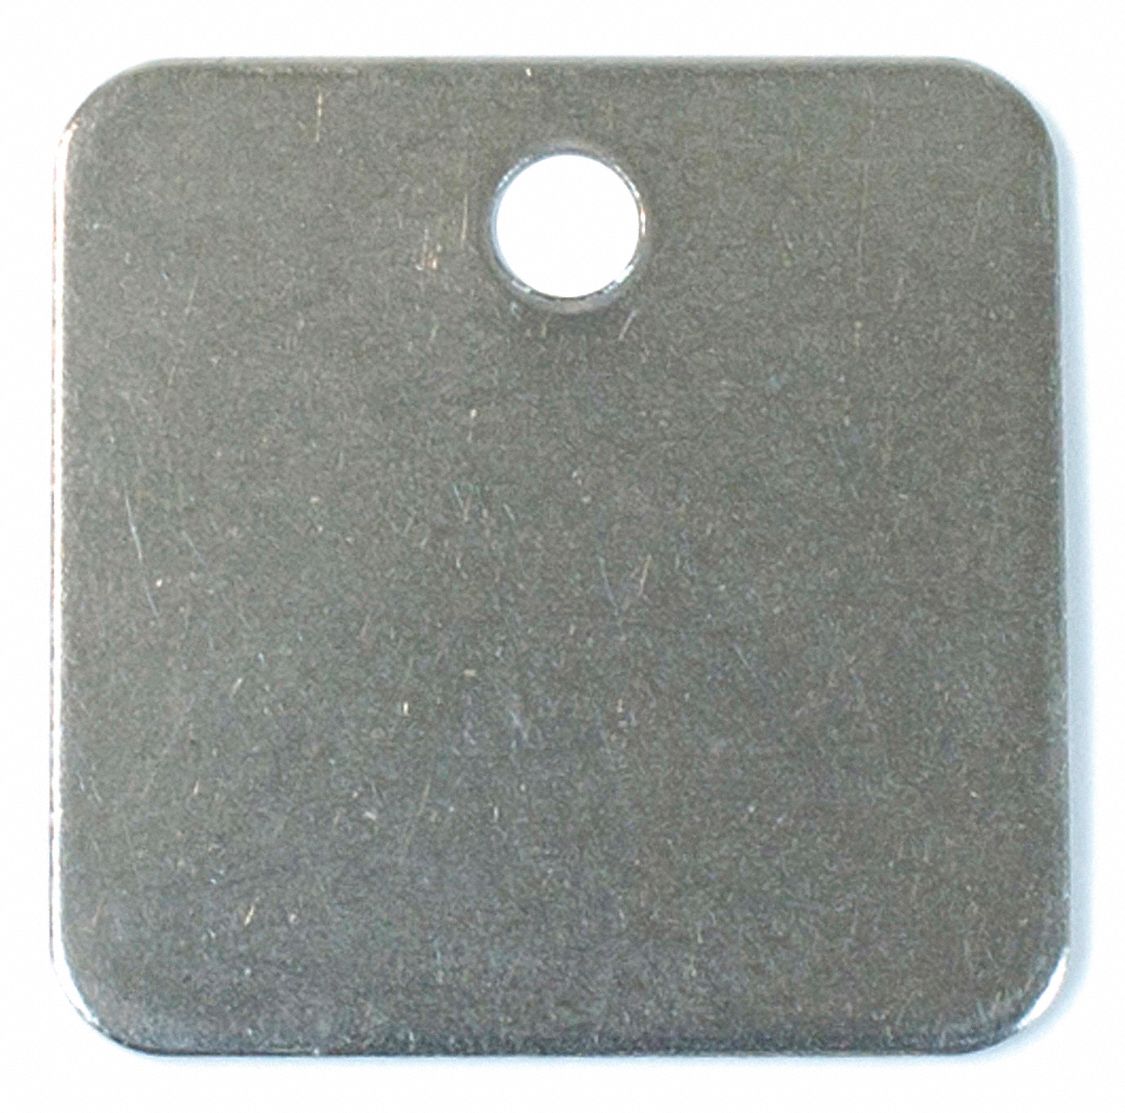 38M410 - 2 Square Stainless Steel Tags PK100